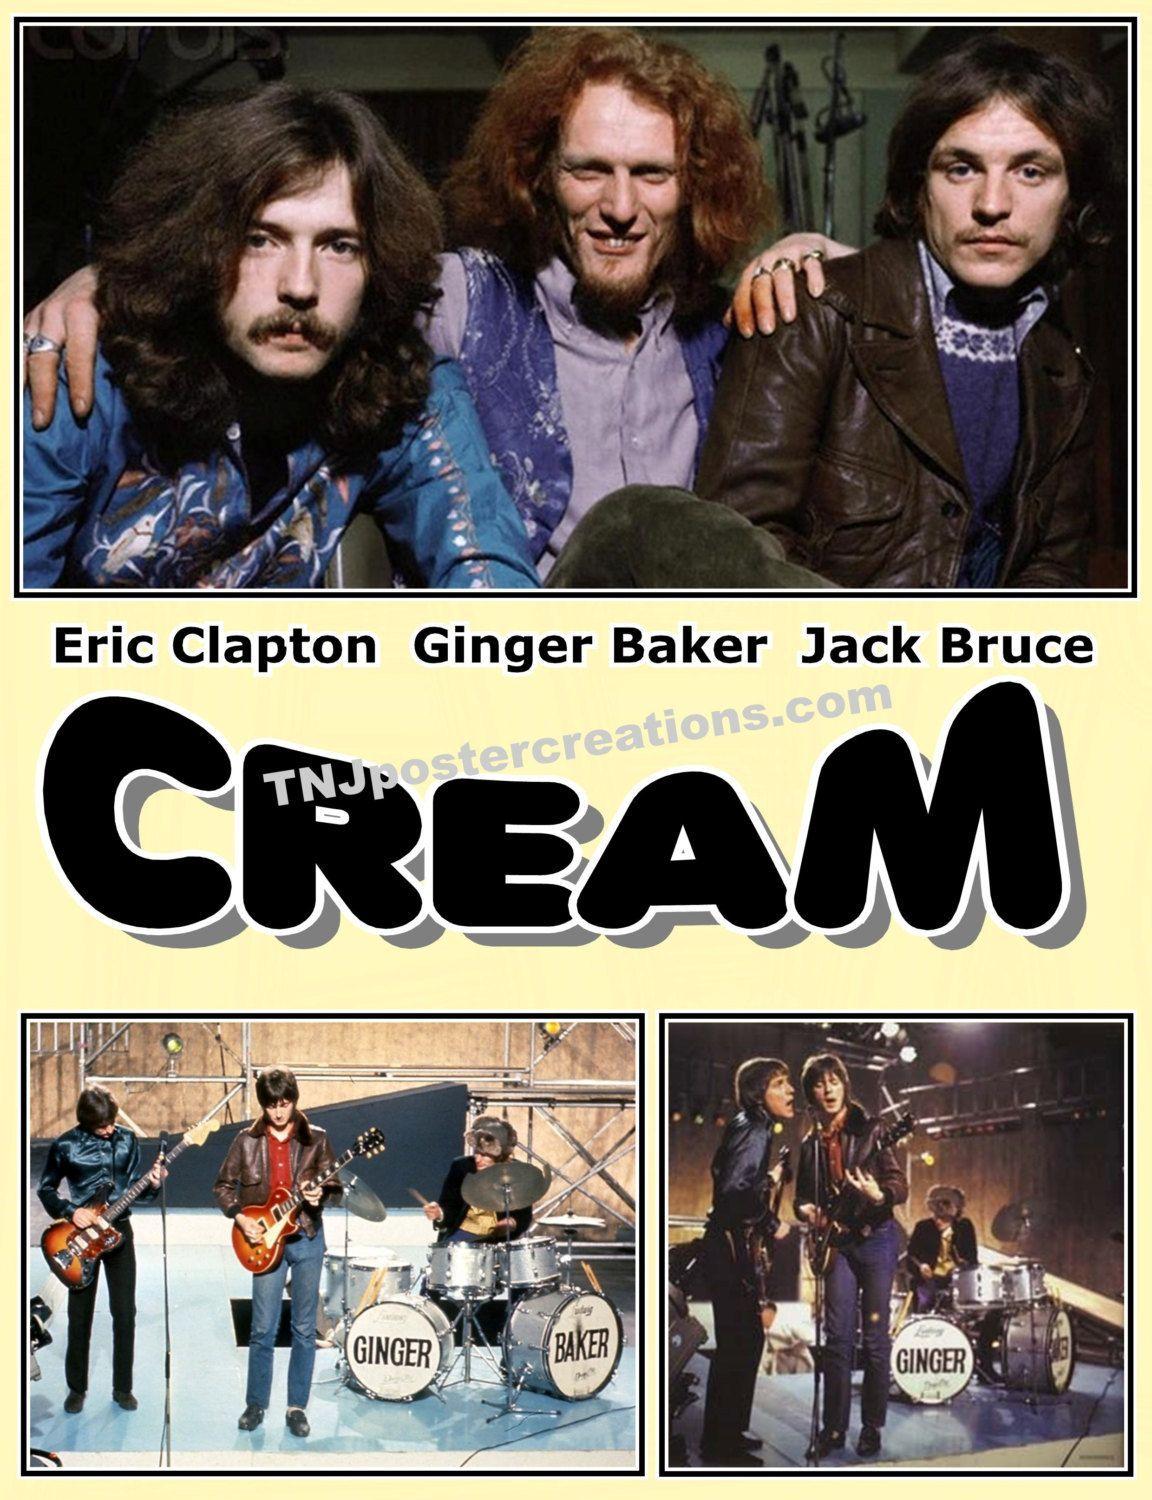 Cream Rock Group Logo - Rock Band “Cream” Poster. Days of REAL Music Remembered